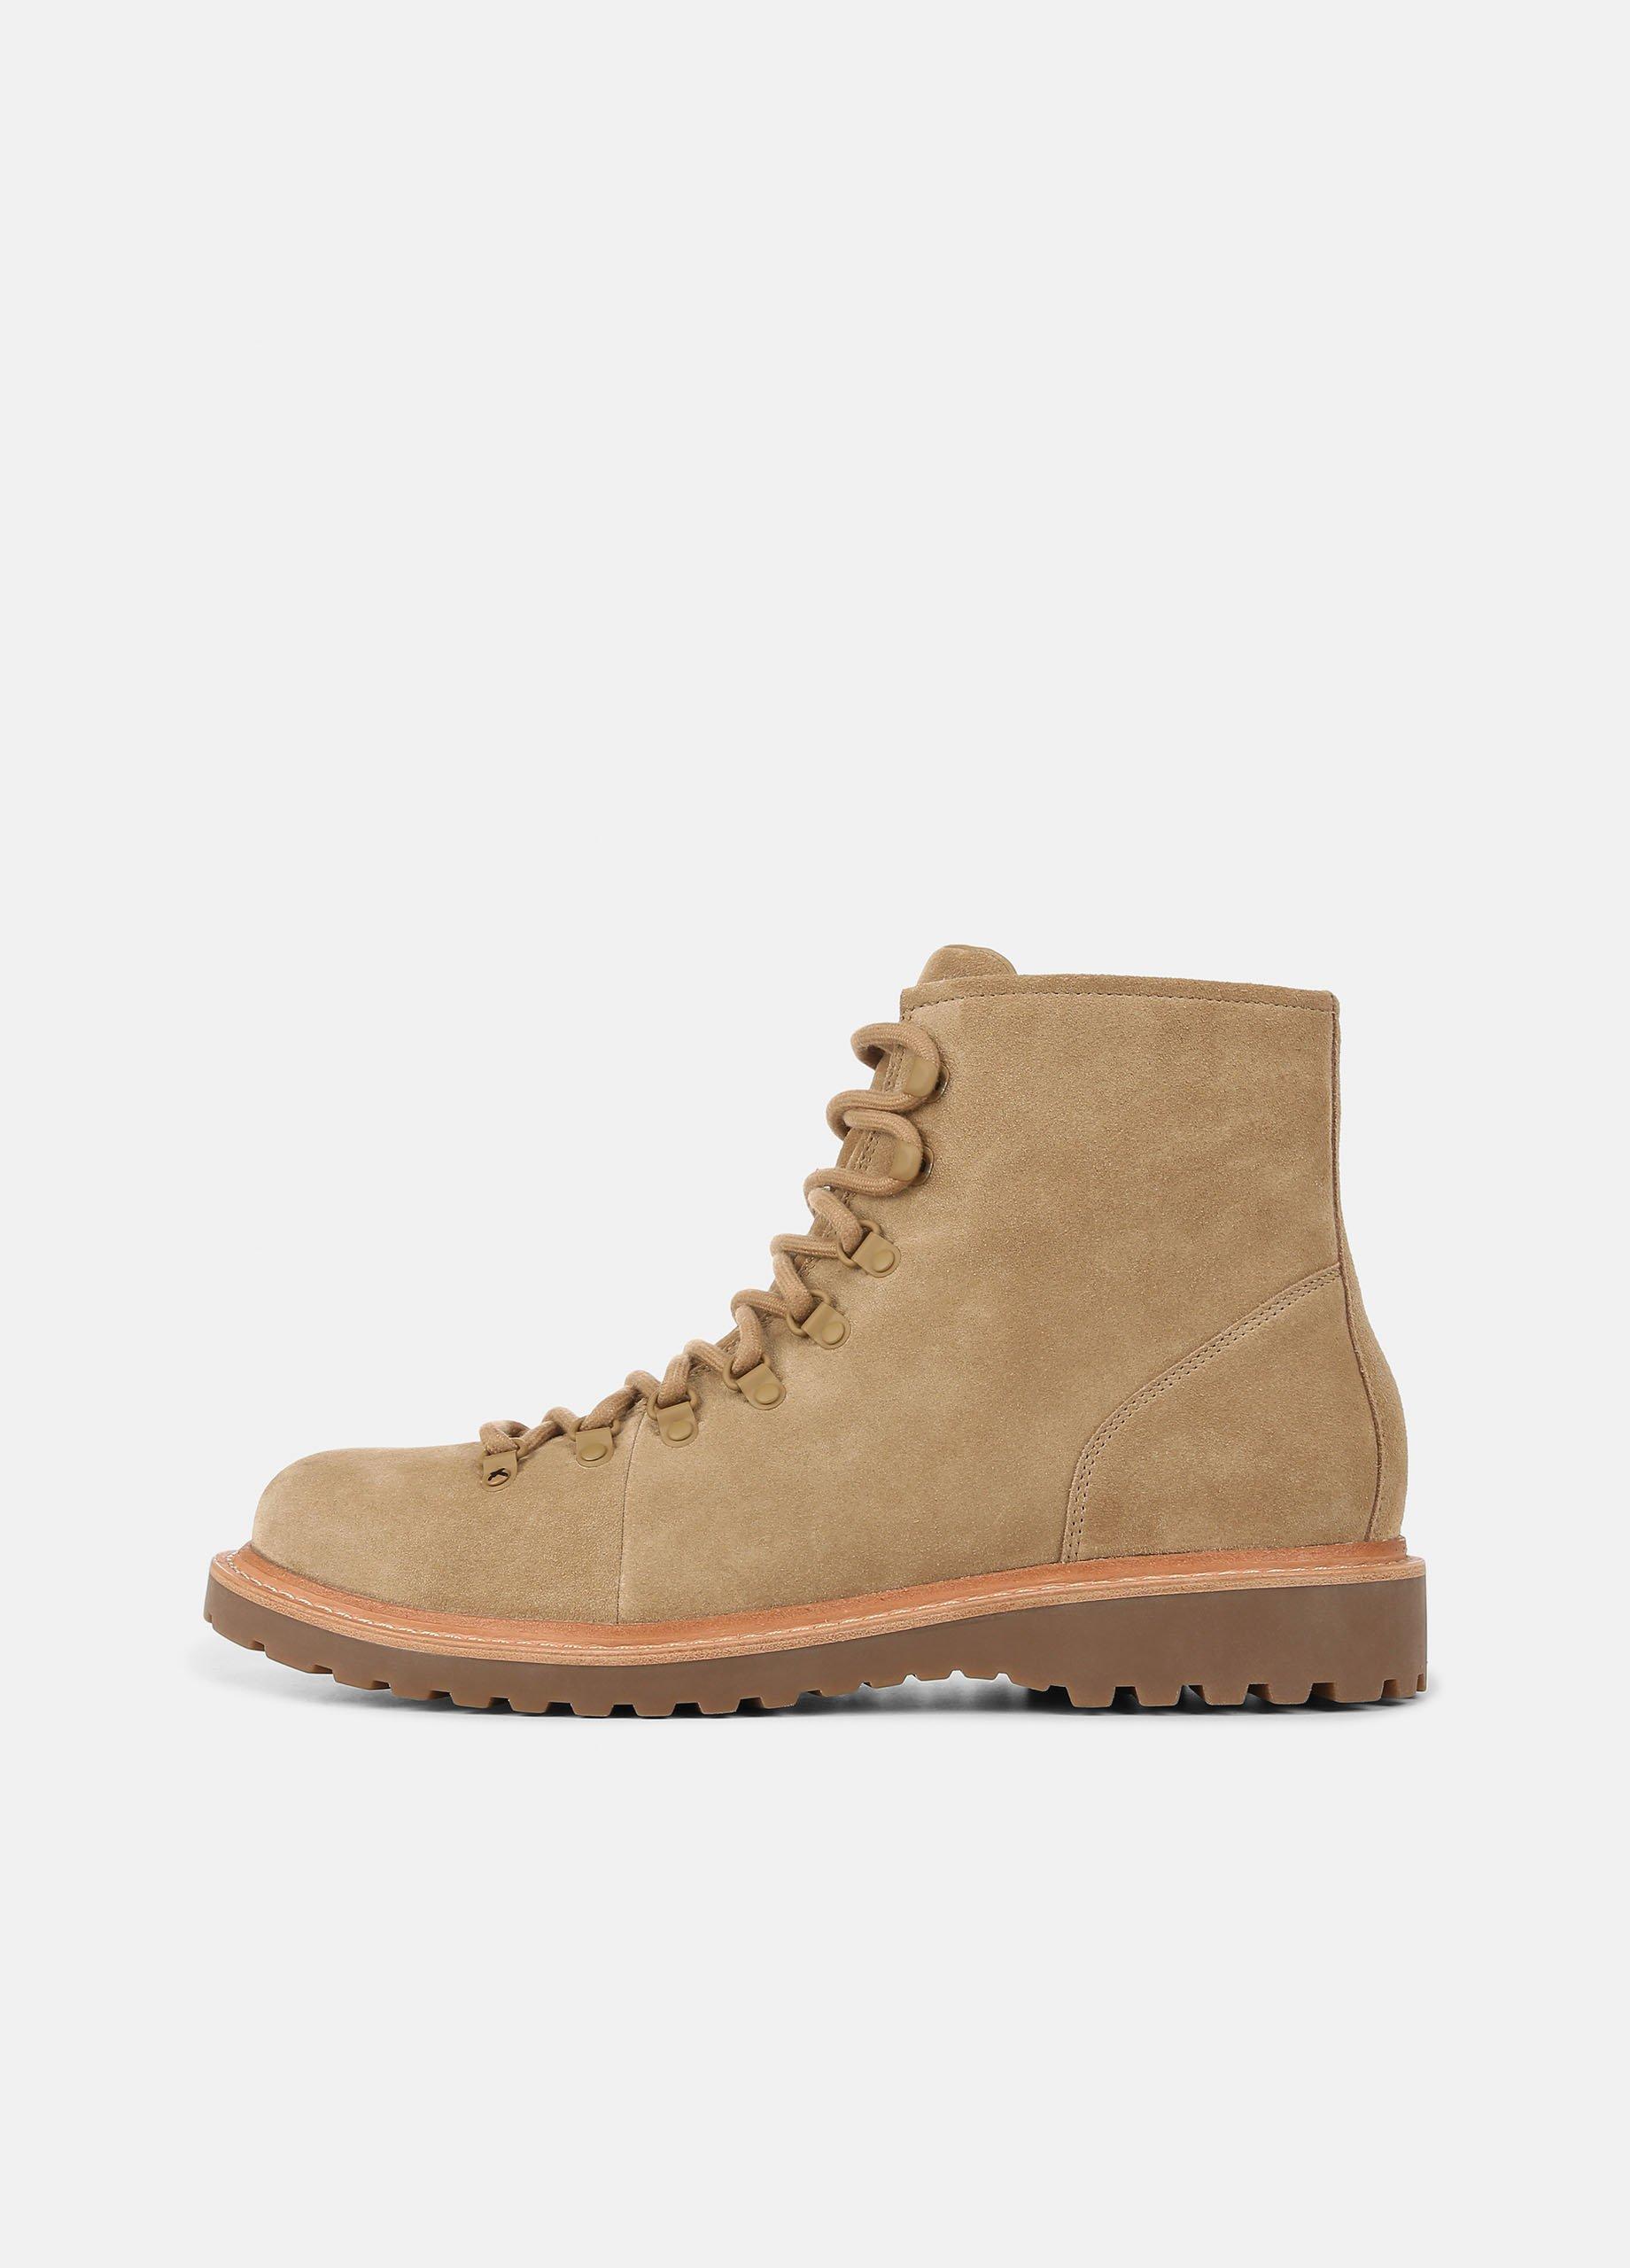 Safi Suede Lug Boot in Shoes | Vince